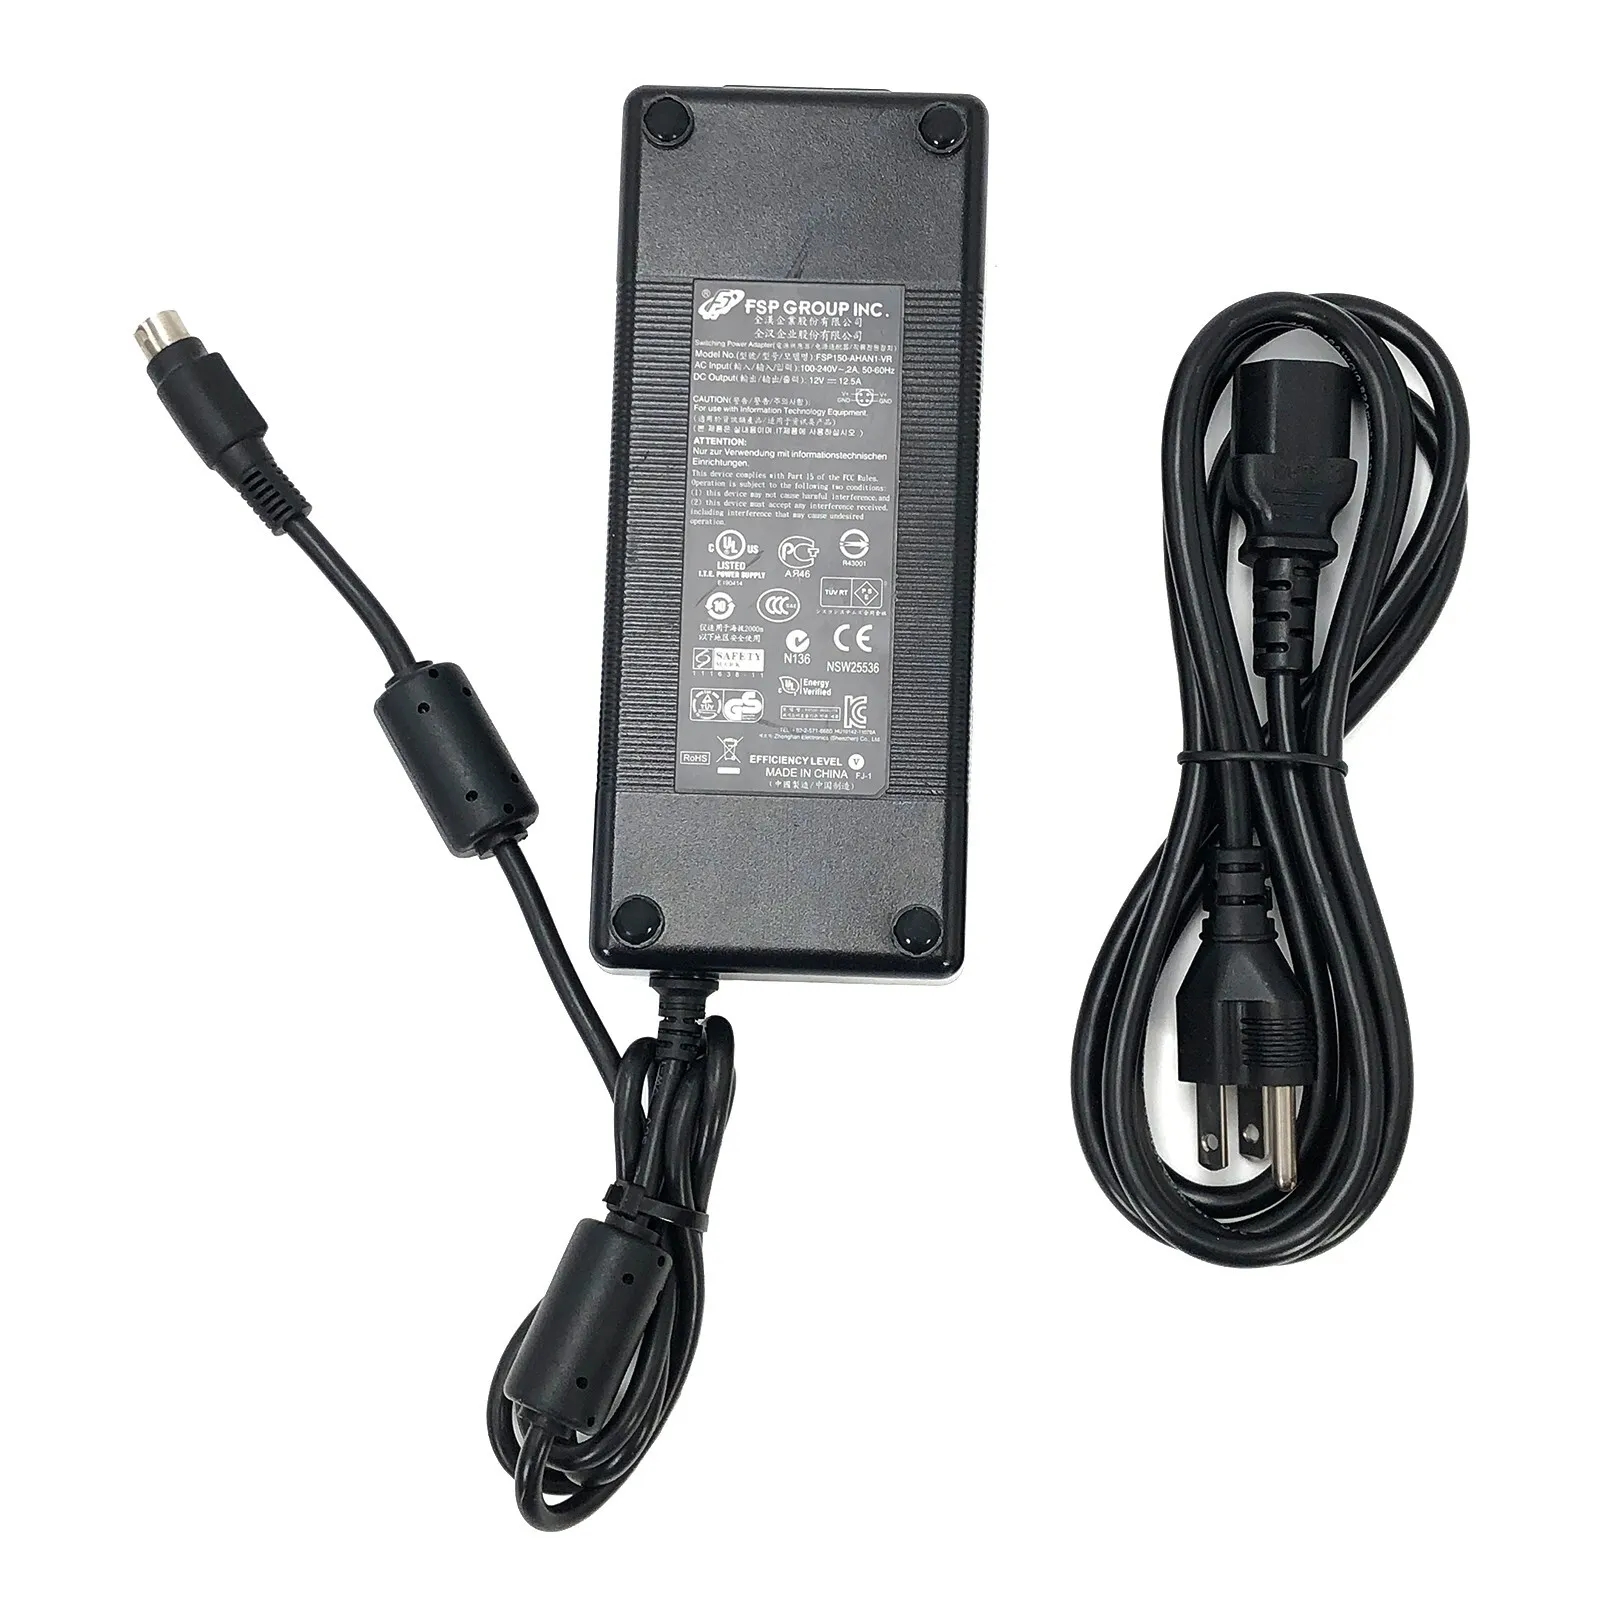 *Brand NEW*Original FSP 12V 12.5A 150W AC Adapter for Synology DS414 DS414j DS418play DS